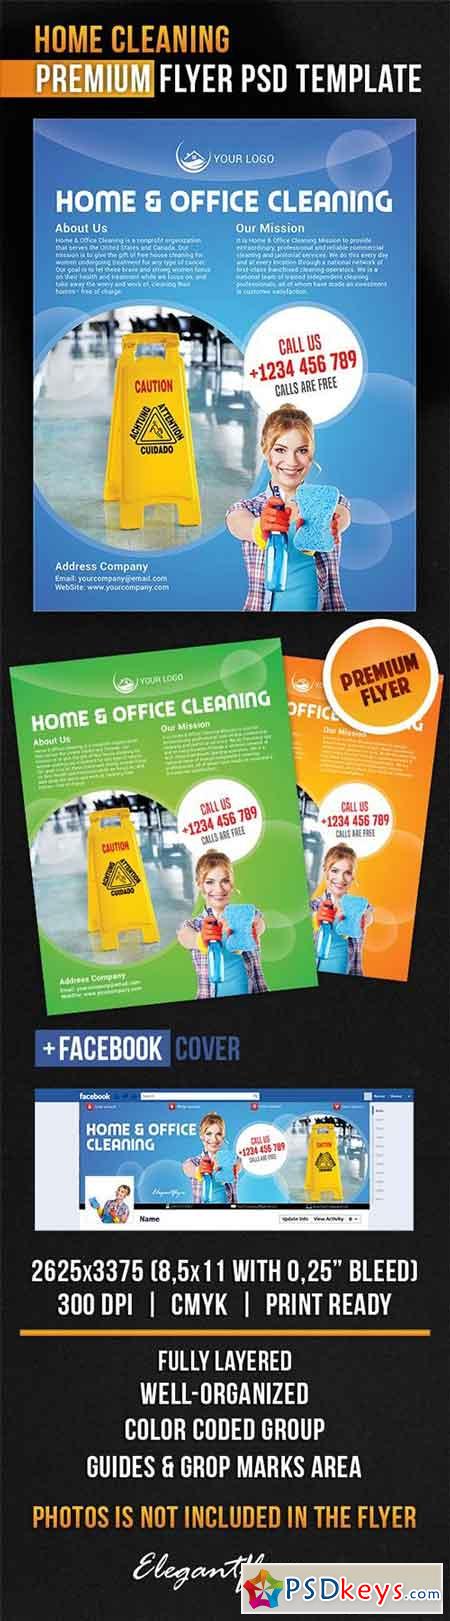 Home Cleaning Flyer PSD Template + Facebook Cover